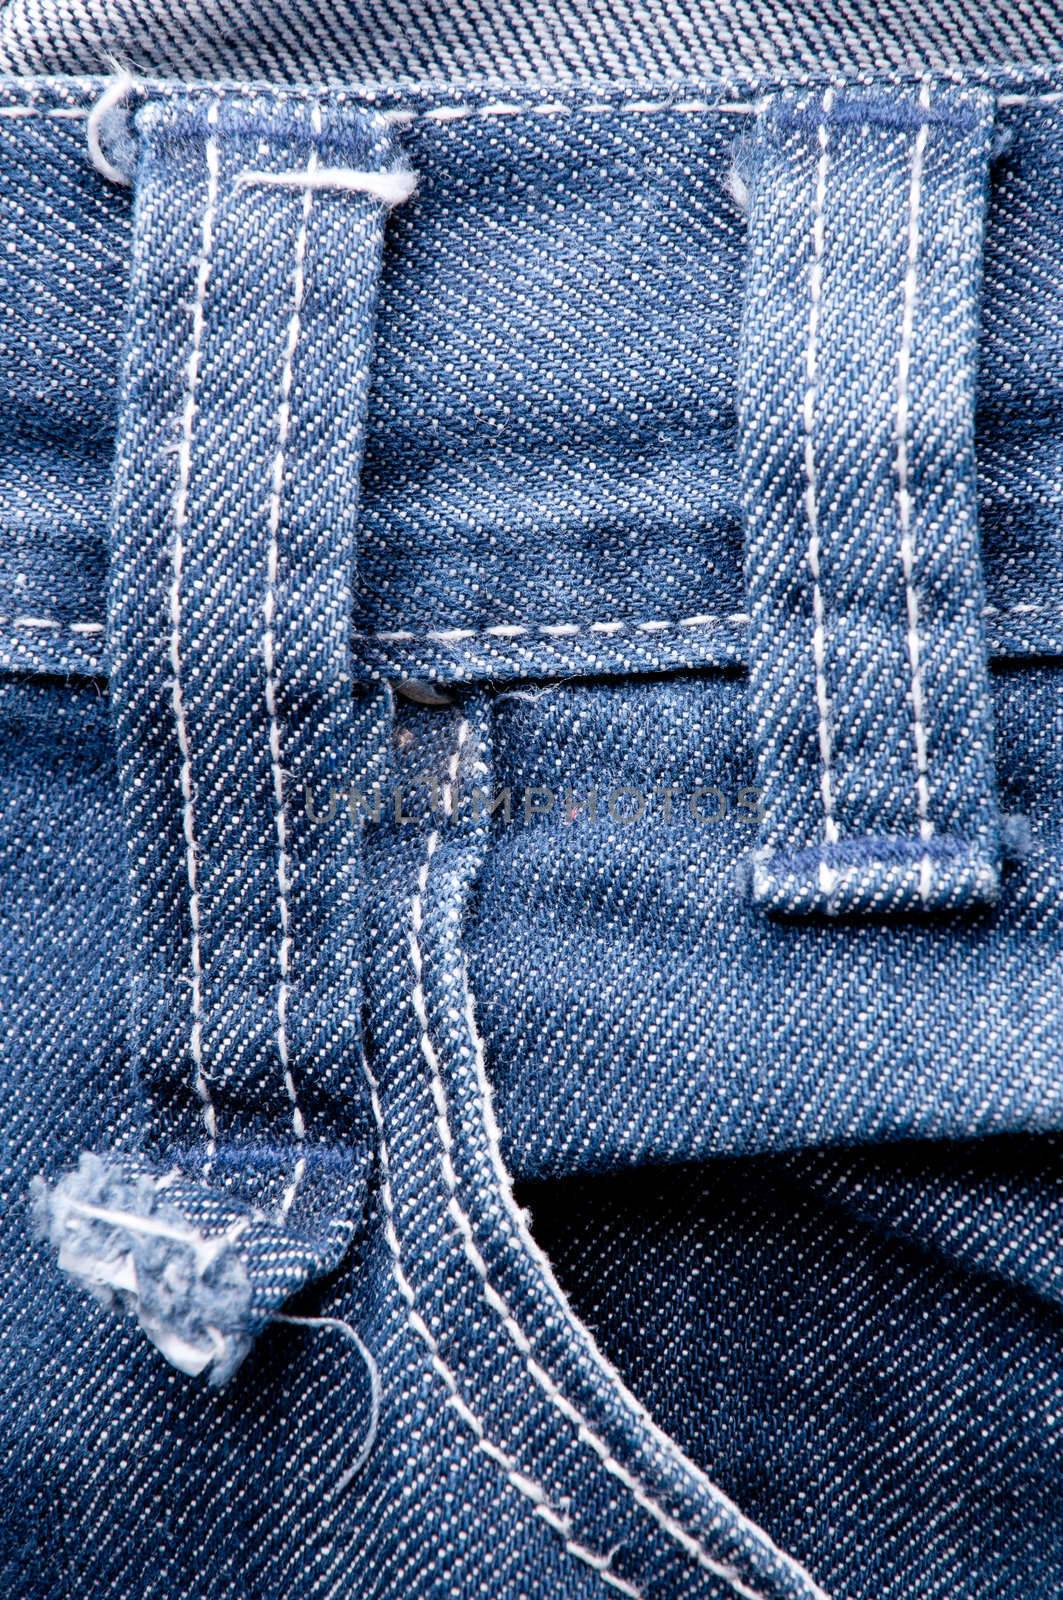 texture of fabric in jeans by cifotart